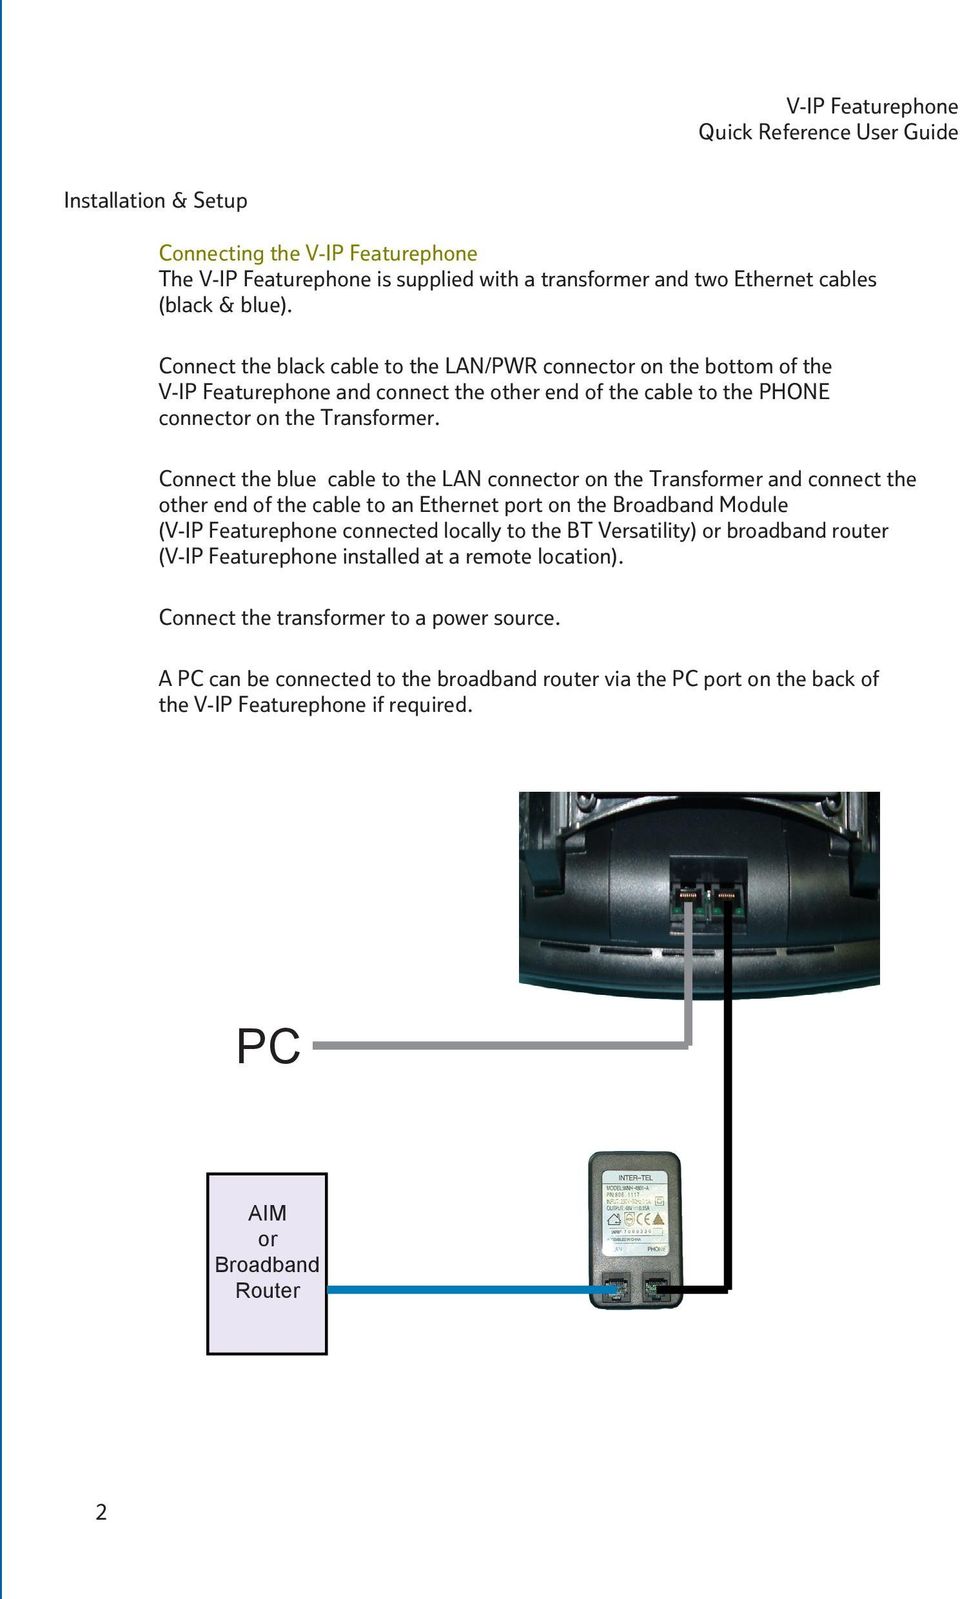 Connect the blue cable to the LAN connector on the Transformer and connect the other end of the cable to an Ethernet port on the Broadband Module (V-IP Featurephone connected locally to the BT